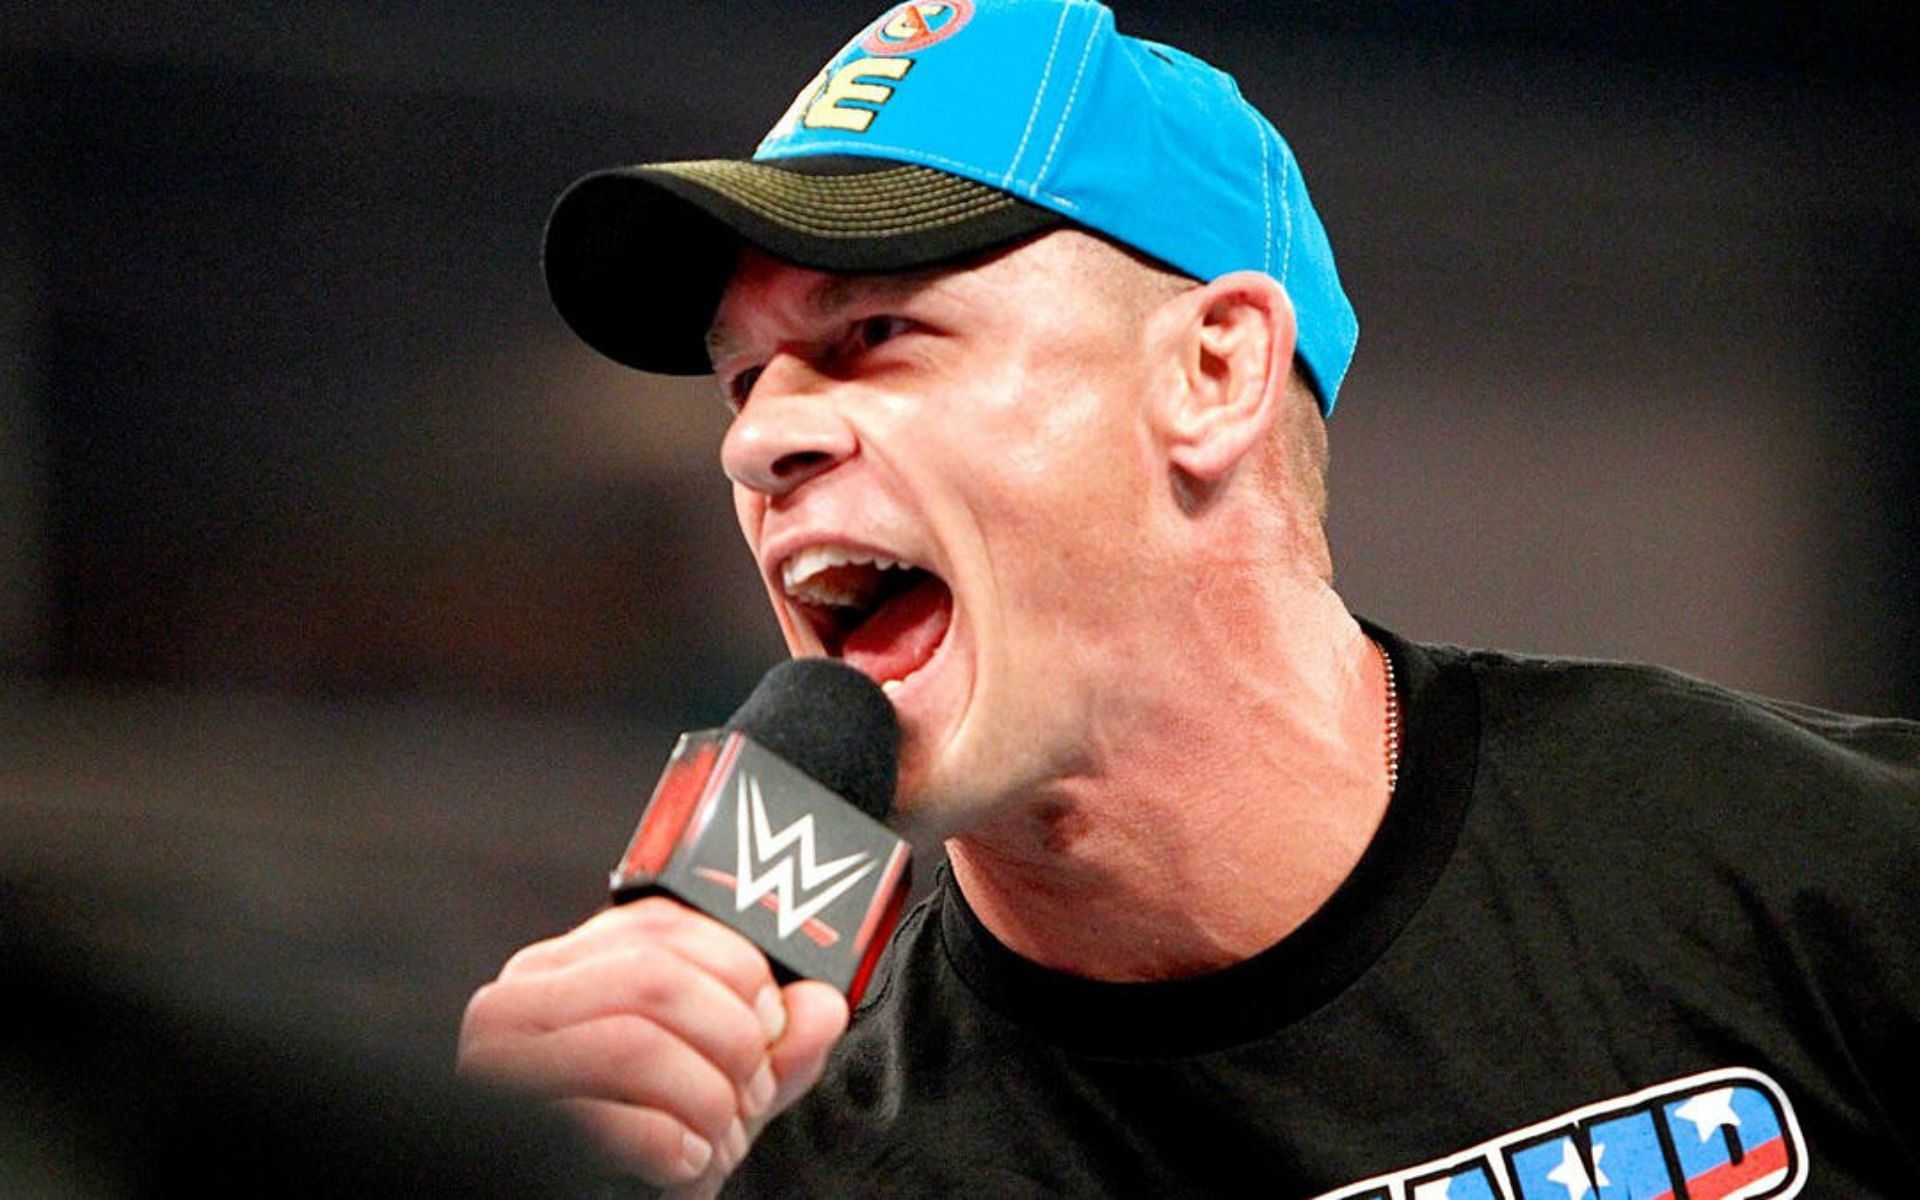 John Cena issues a United States Championship open challenge.